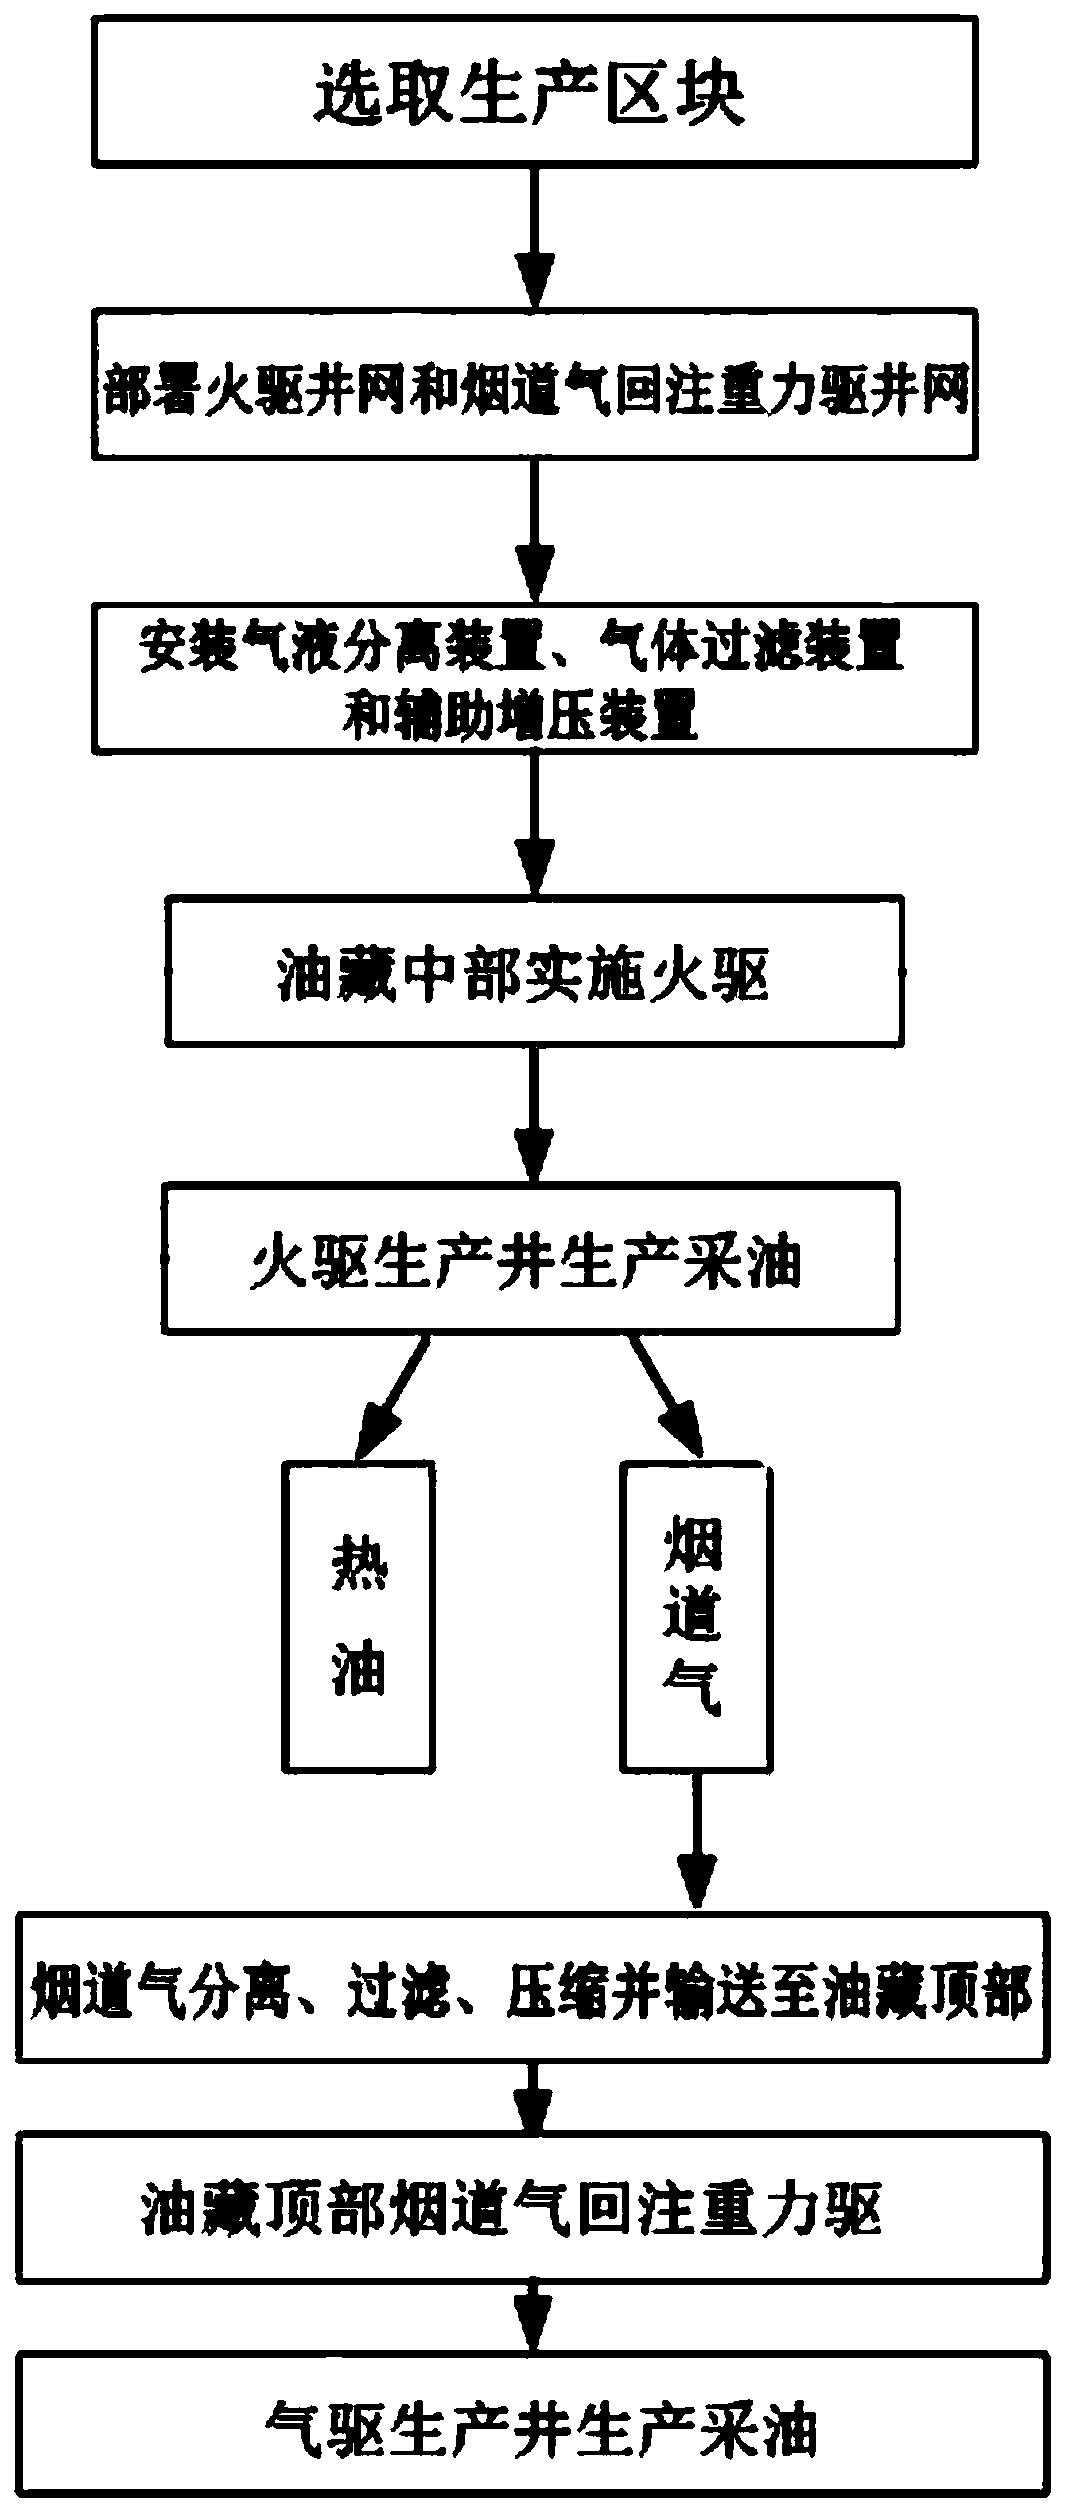 Synergistic production method of fire flooding and flue gas recovery gravity flooding in high-dip heavy oil reservoirs